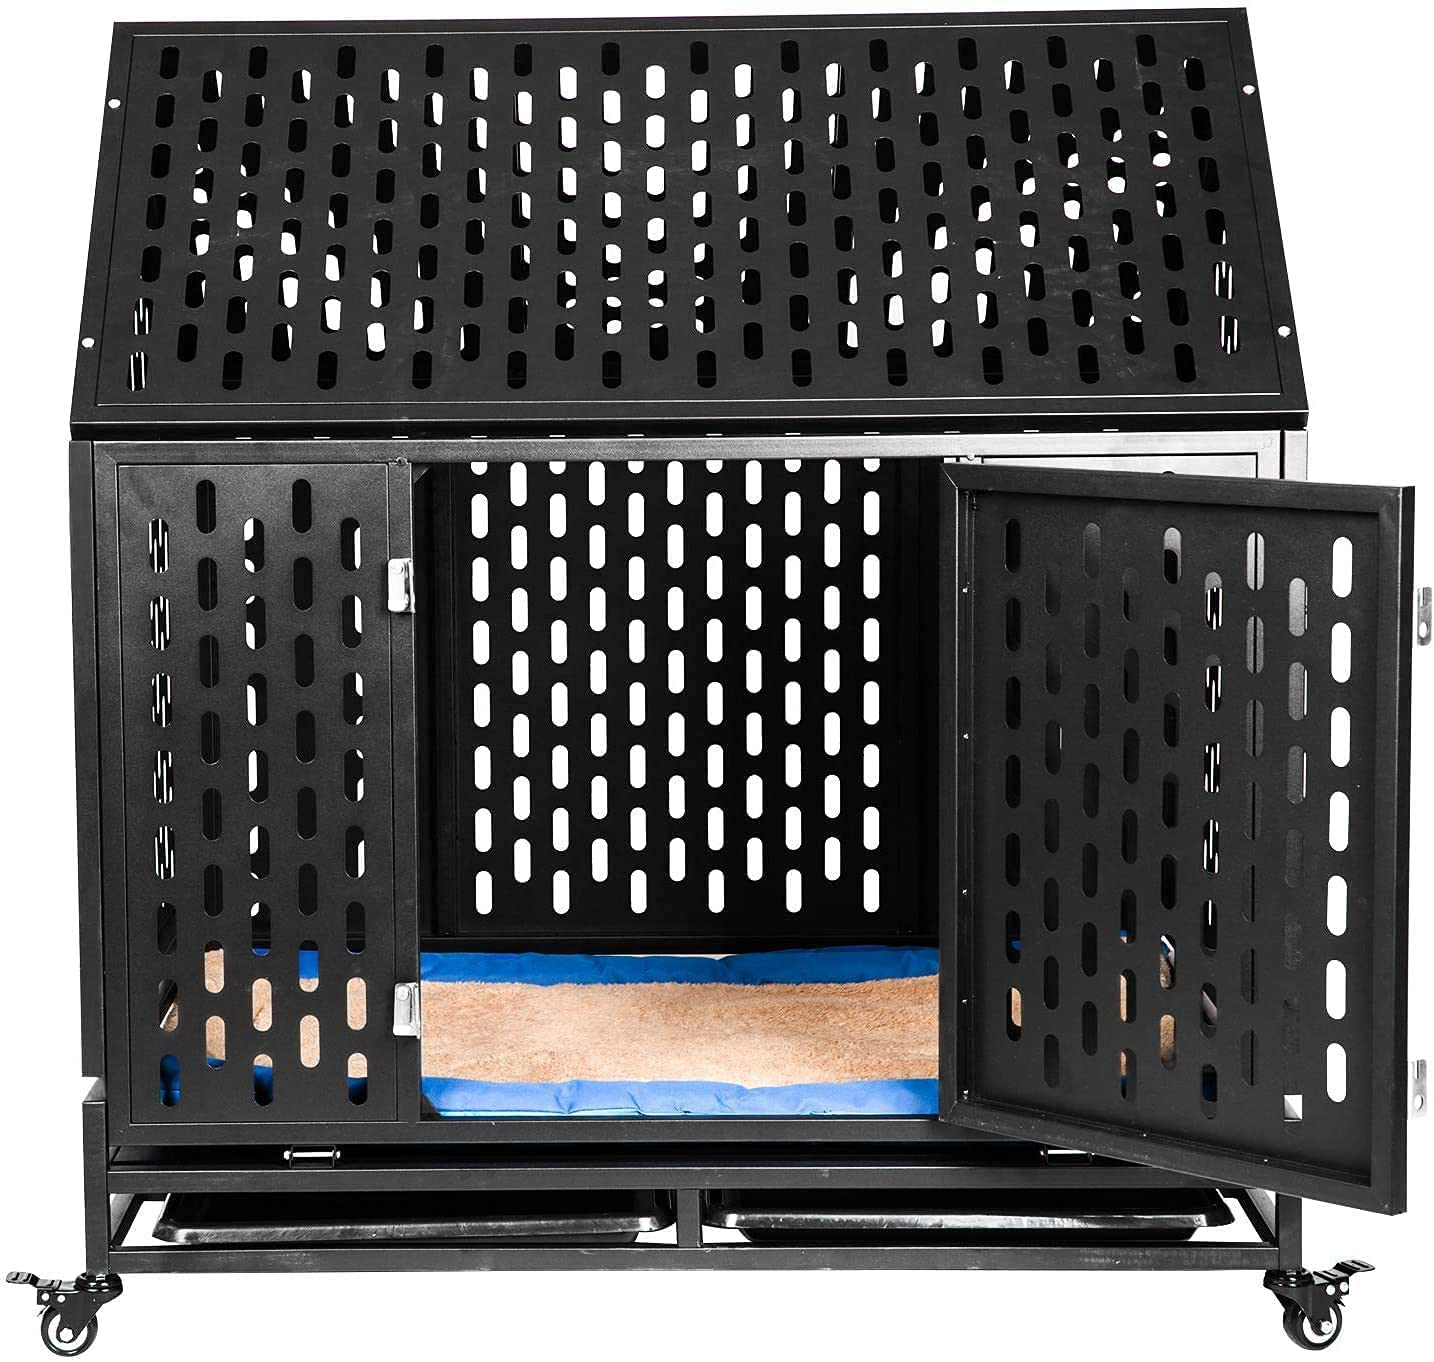 Haige Pet Your Pet Nanny Heavy Duty Dog Crate Cage Kennel Playpen Large Strong Metal for Large Dogs Cats with Two Prevent Escape Lock and Four Lockable Wheels